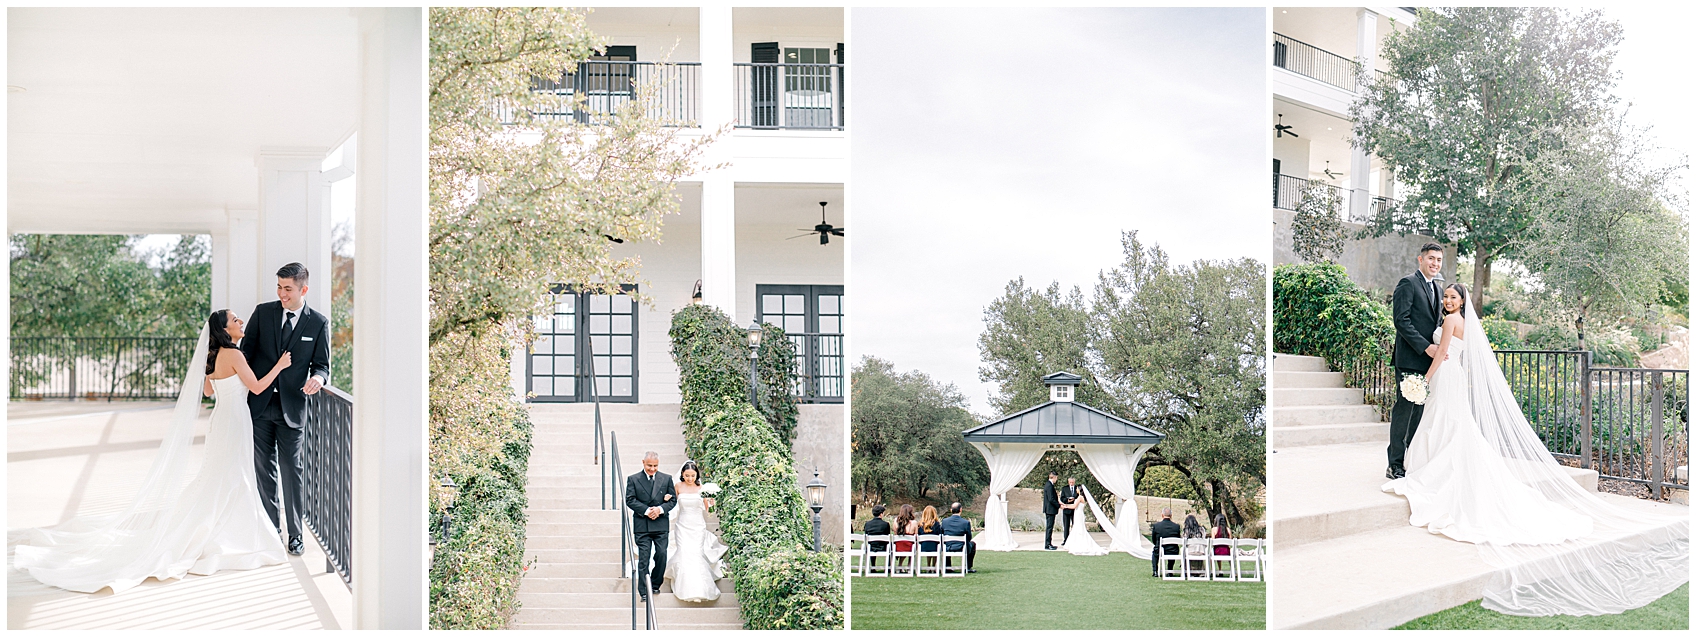 locations for elopements and micro intimate weddings in the texas hill country by allison jeffers photography 0001